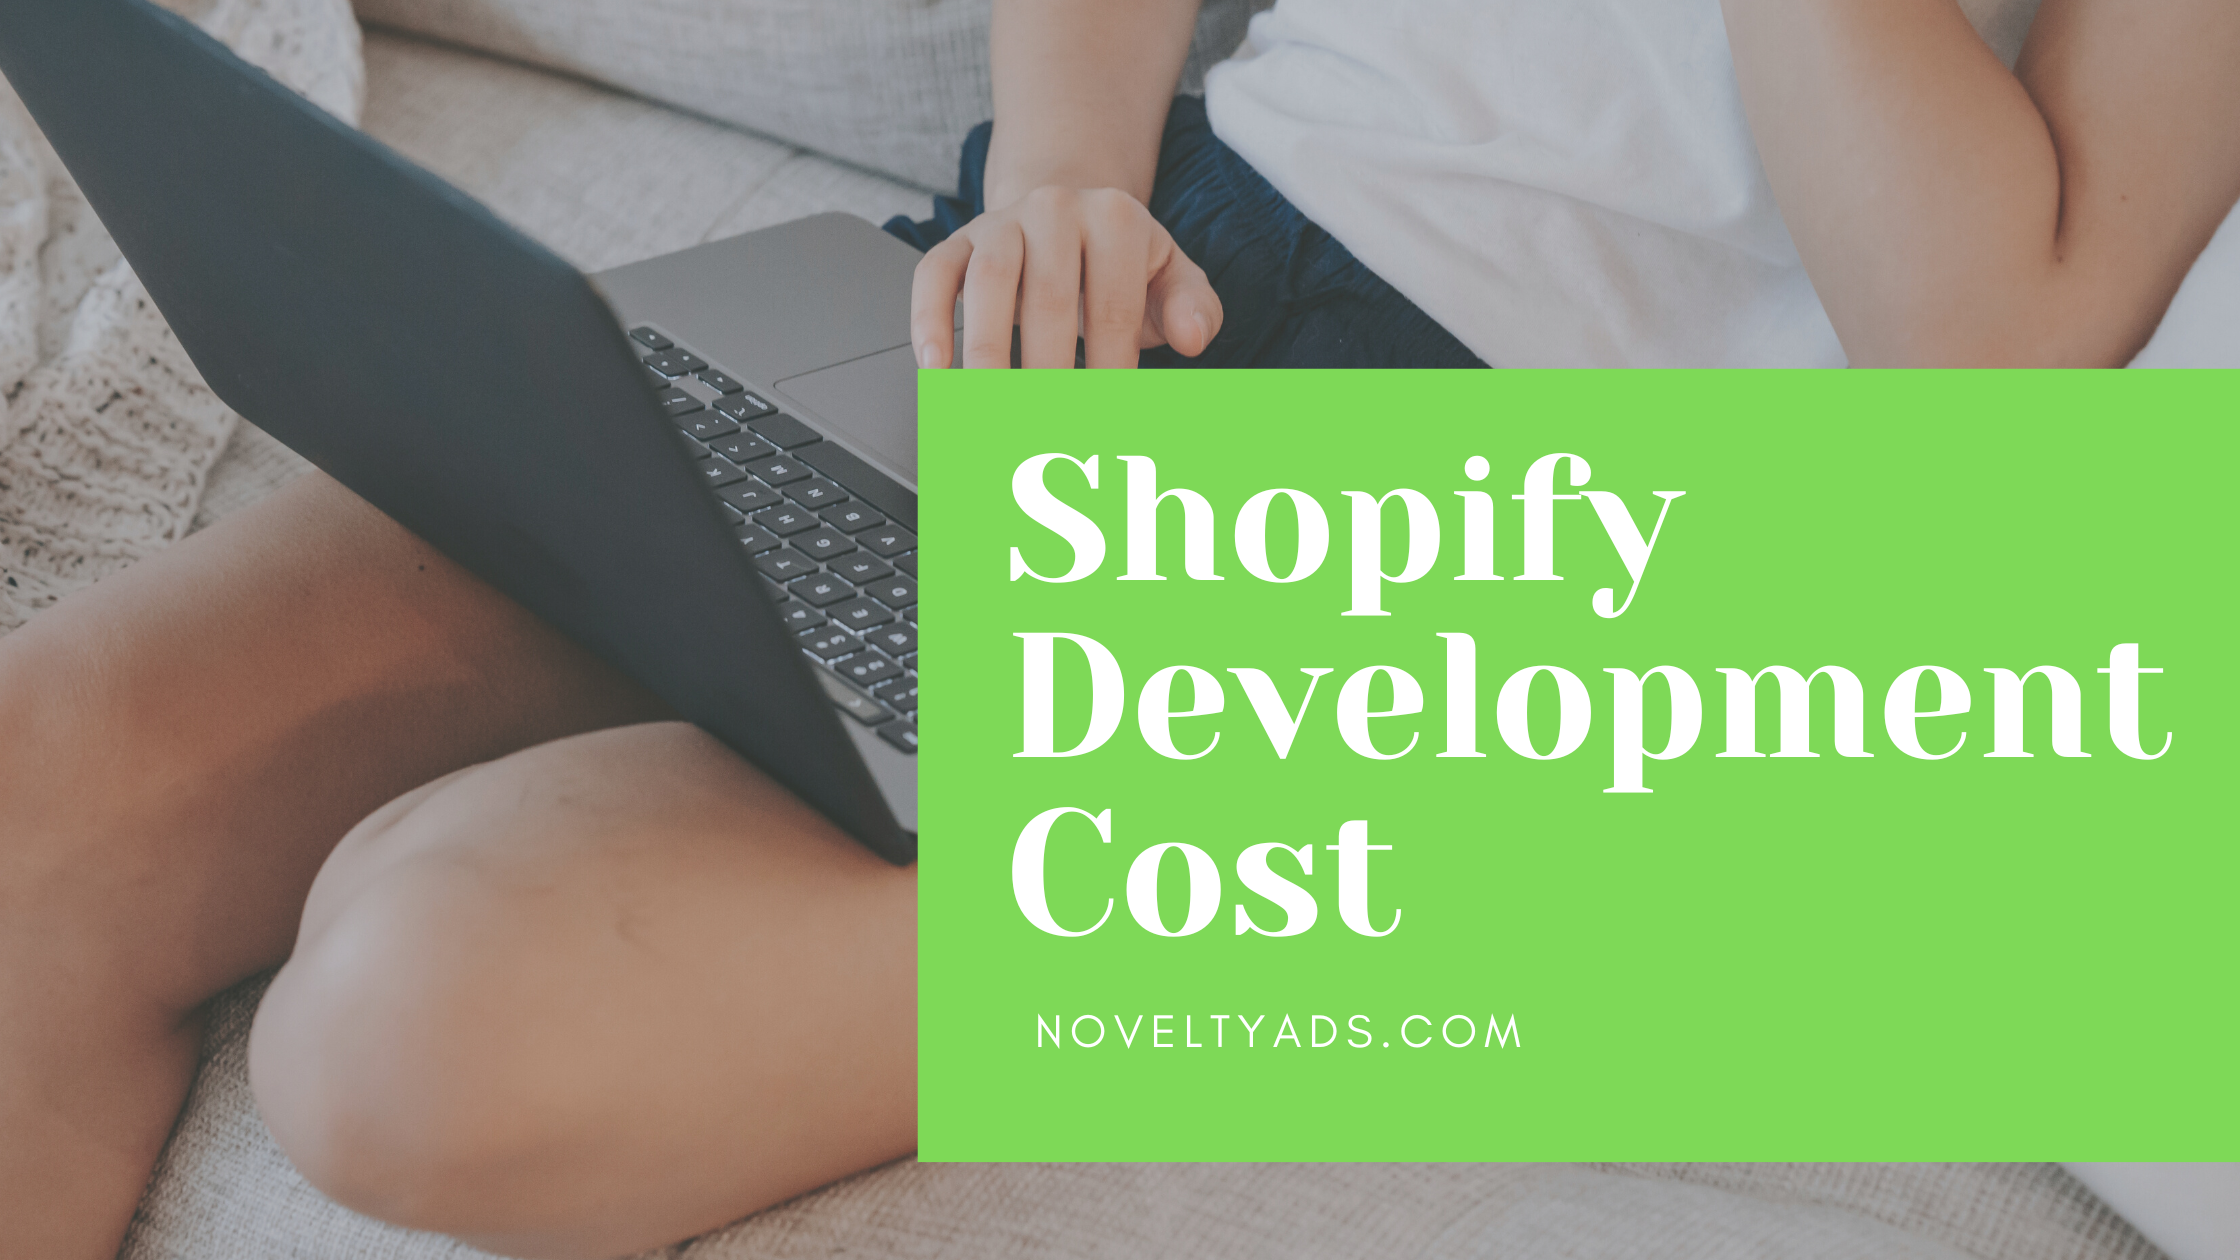 Shopify Development Cost, How much does it cost to hire a shopify developer, Shopify Development Agency. 